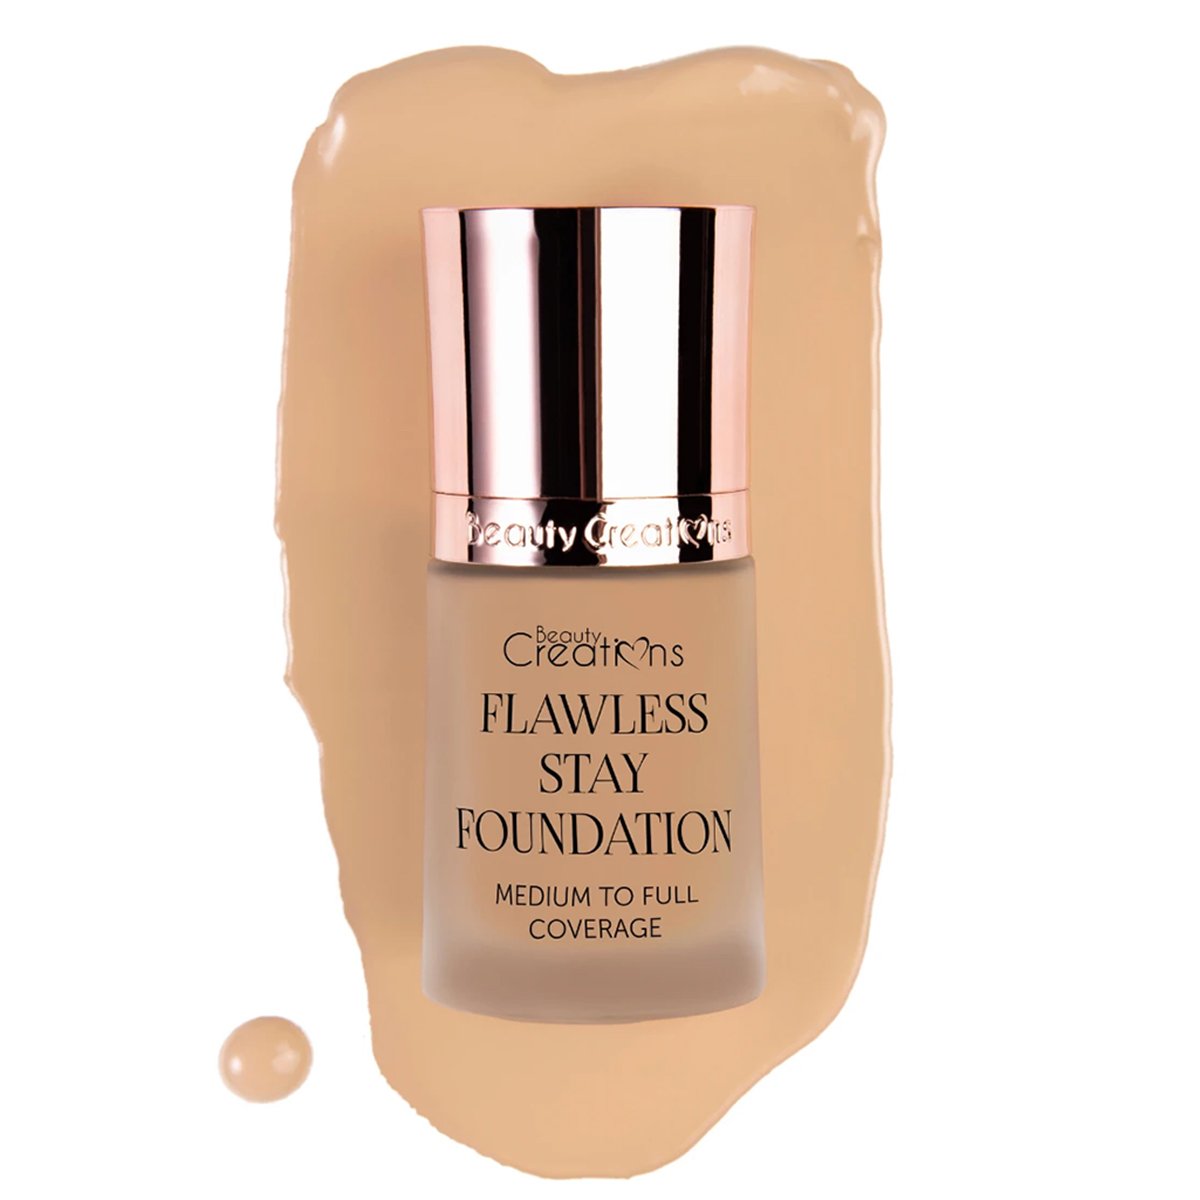 FLAWLESS STAY FOUNDATION 6 - BEAUTY CREATIONS